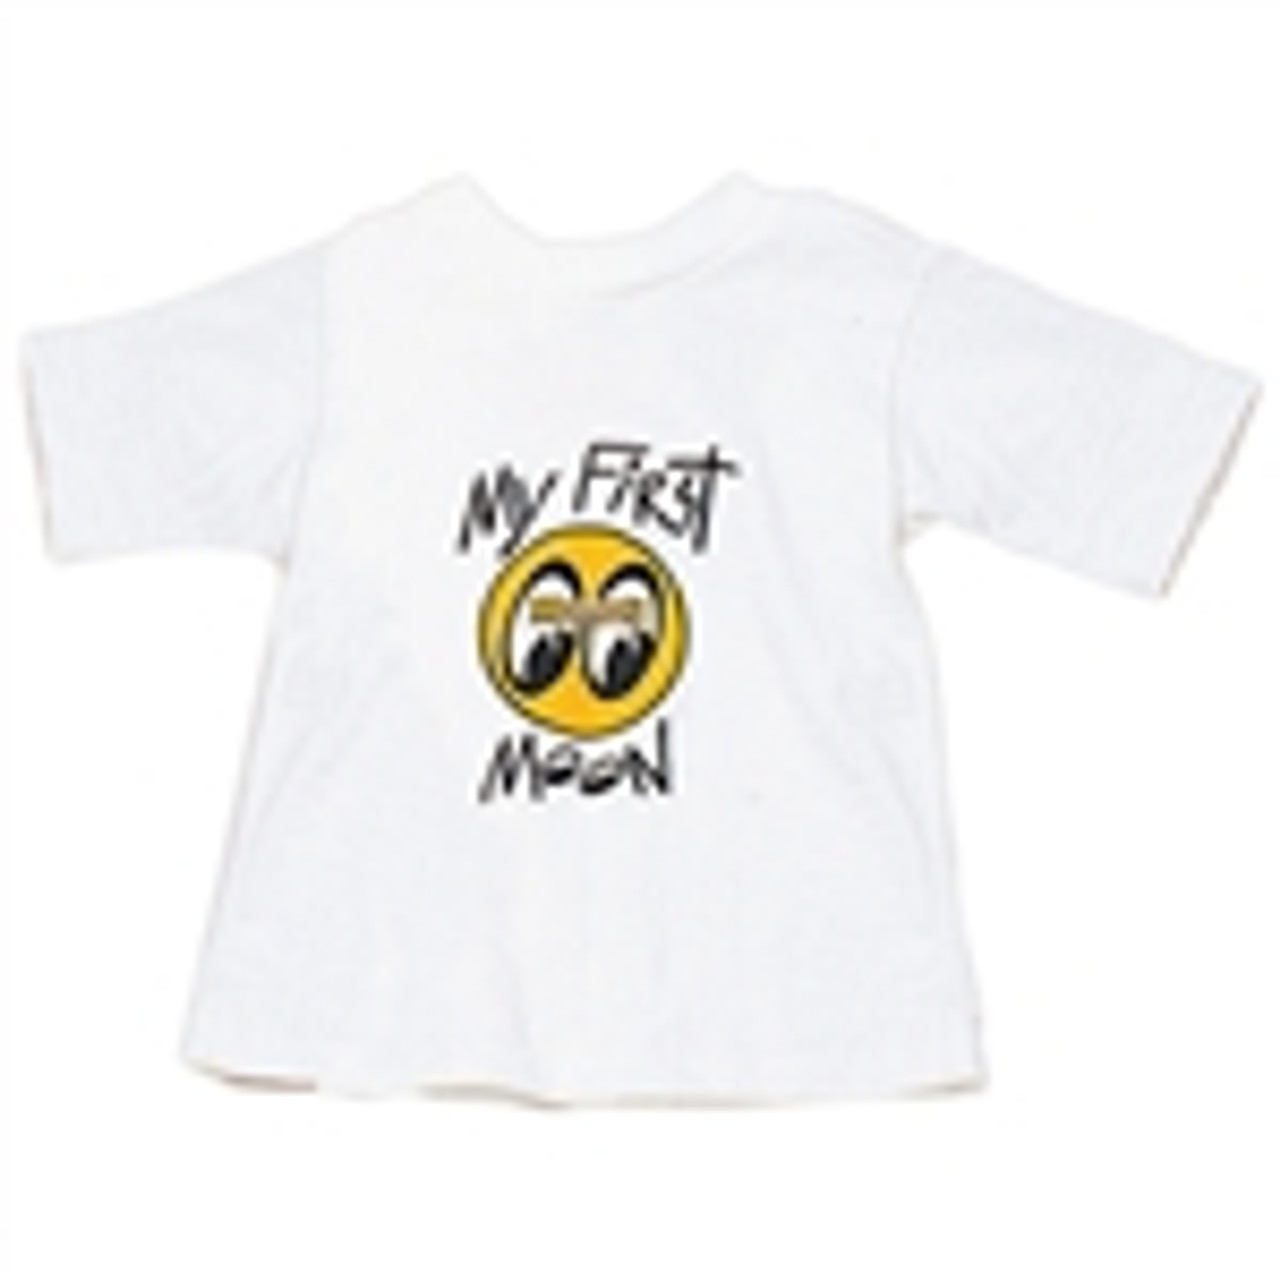 My First Moon - Infant T-Shirt